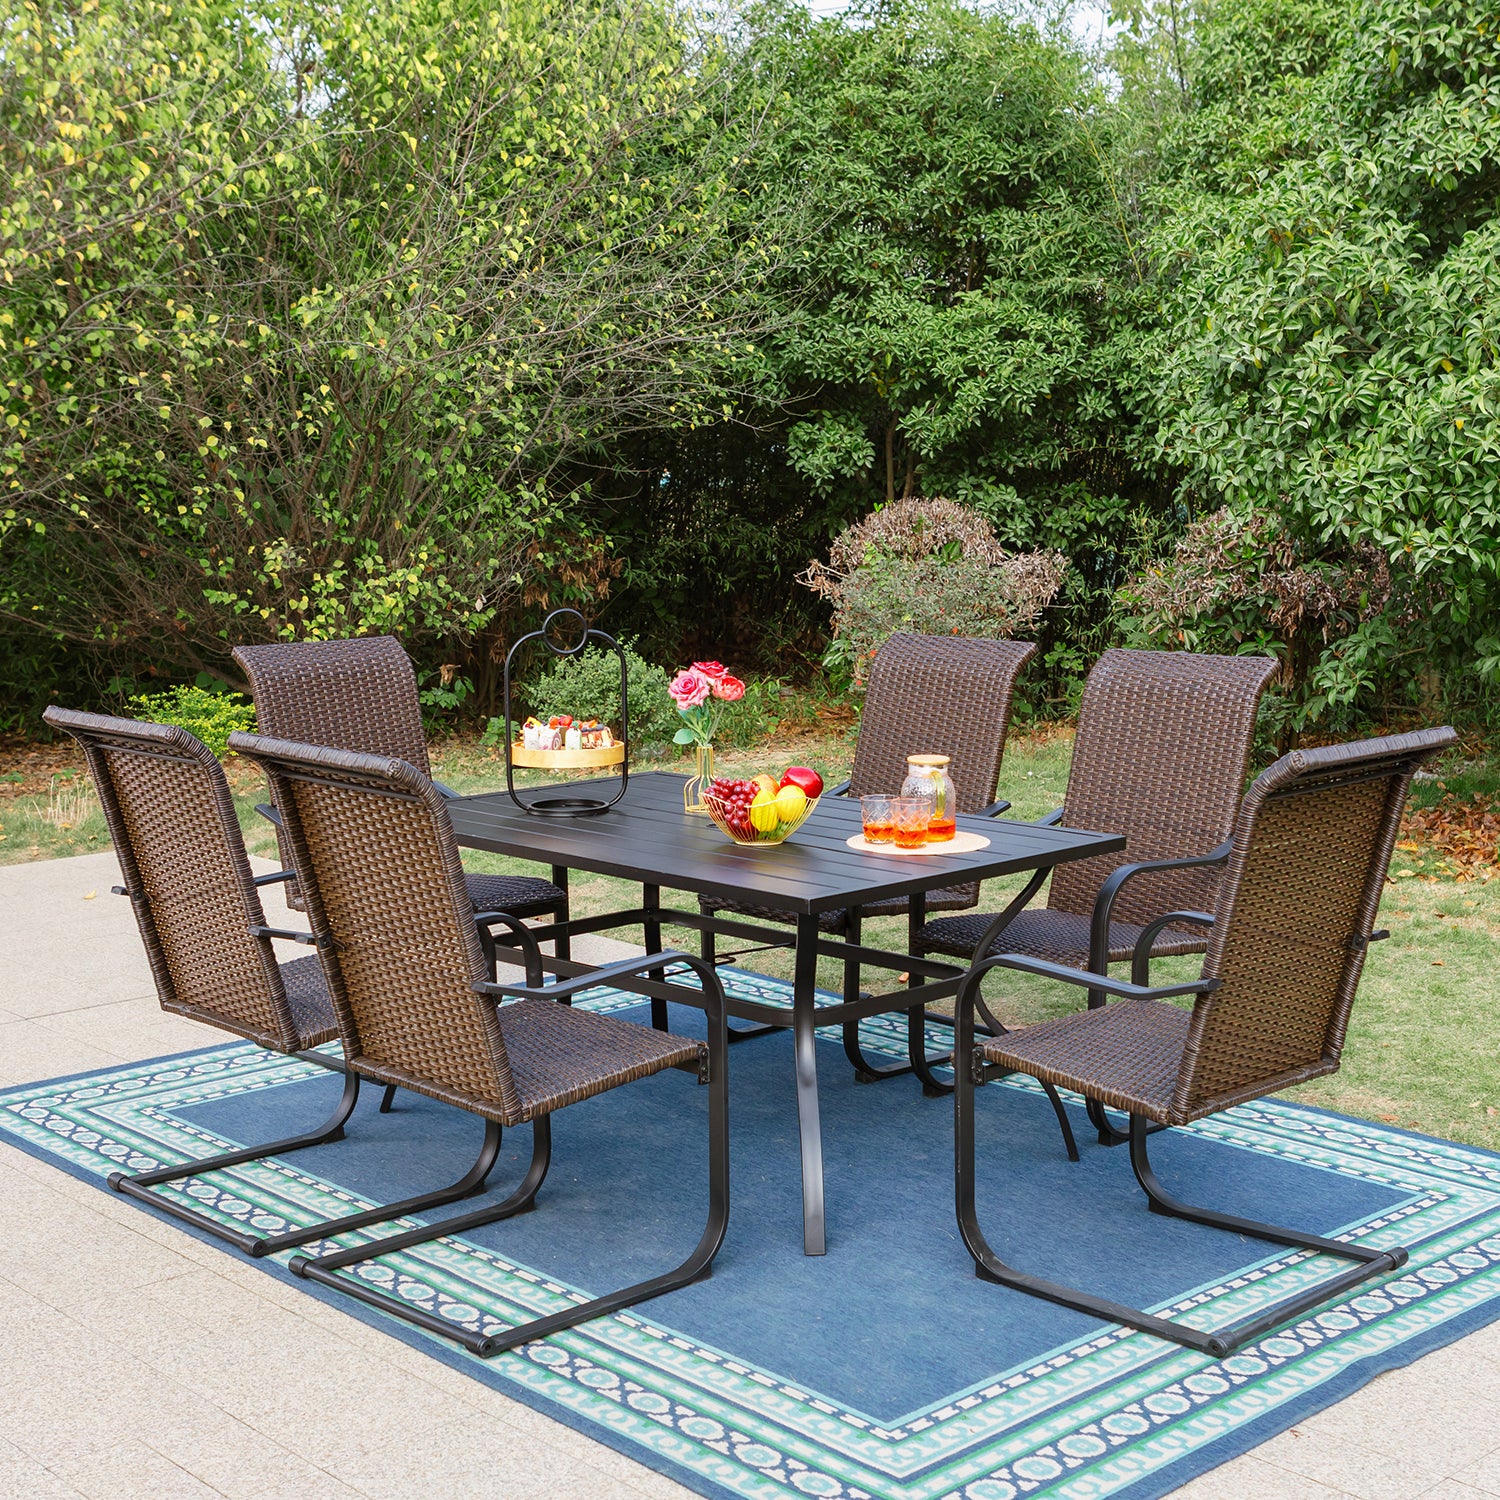 Sophia & William 7-Piece Steel Rectangle Table & Rattan C-spring Chairs Outdoor Dining Set